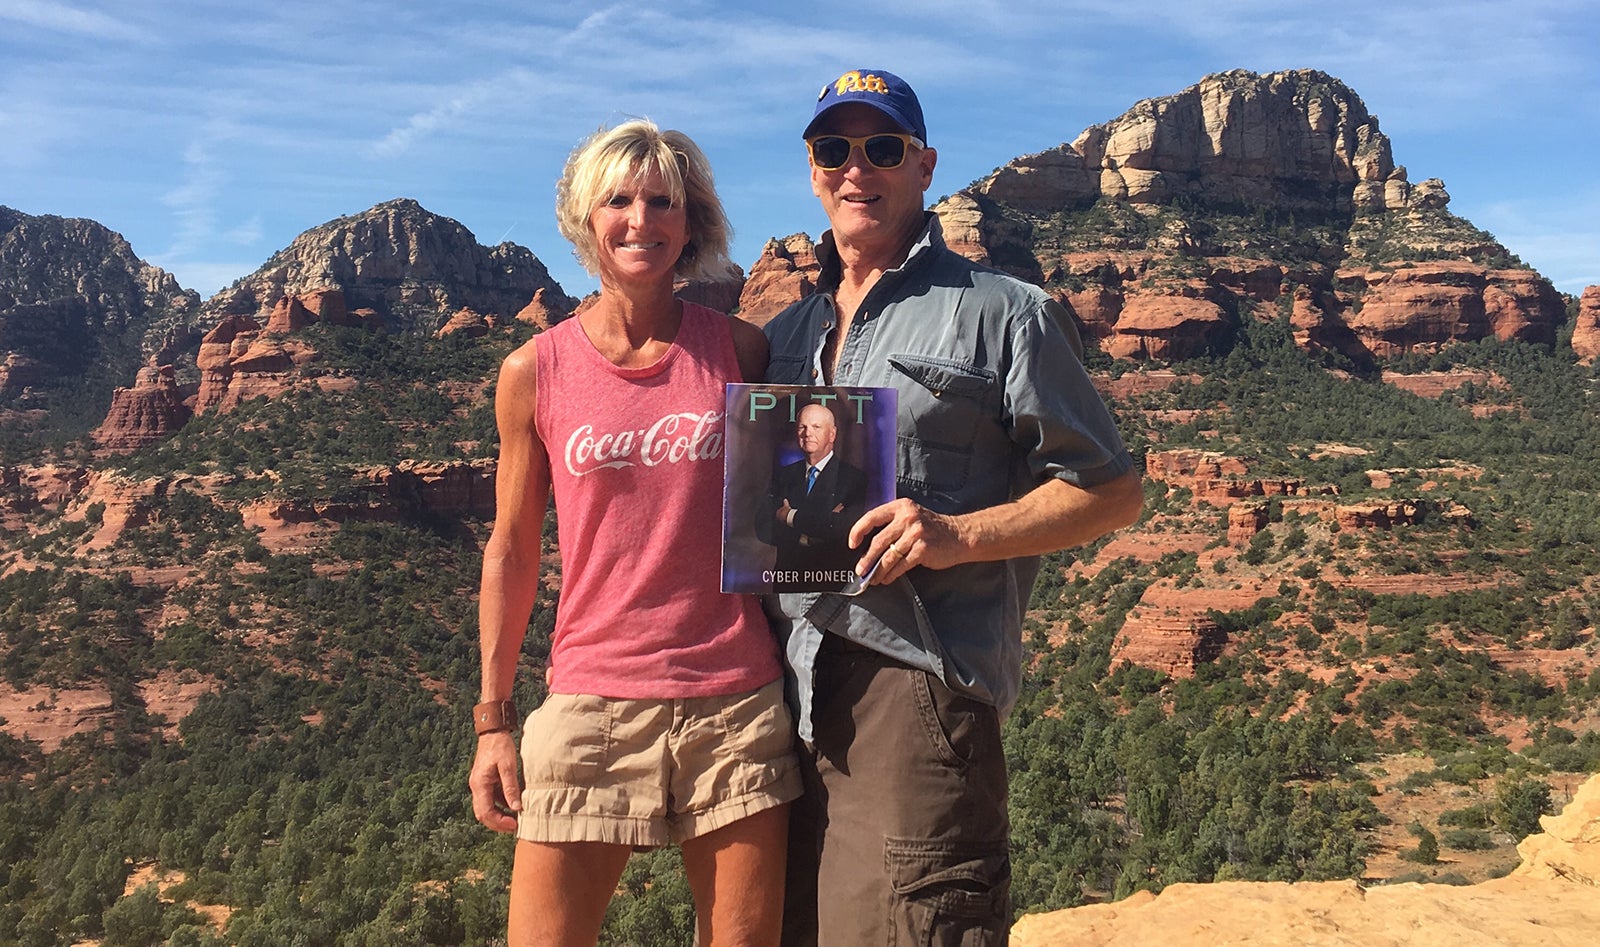 blond-haired woman in shorts and Coca-Cola tank top and man in short-sleeves and Pitt script hat hold Fall 2019 issue of Pitt Magazine in front of rocky landscape